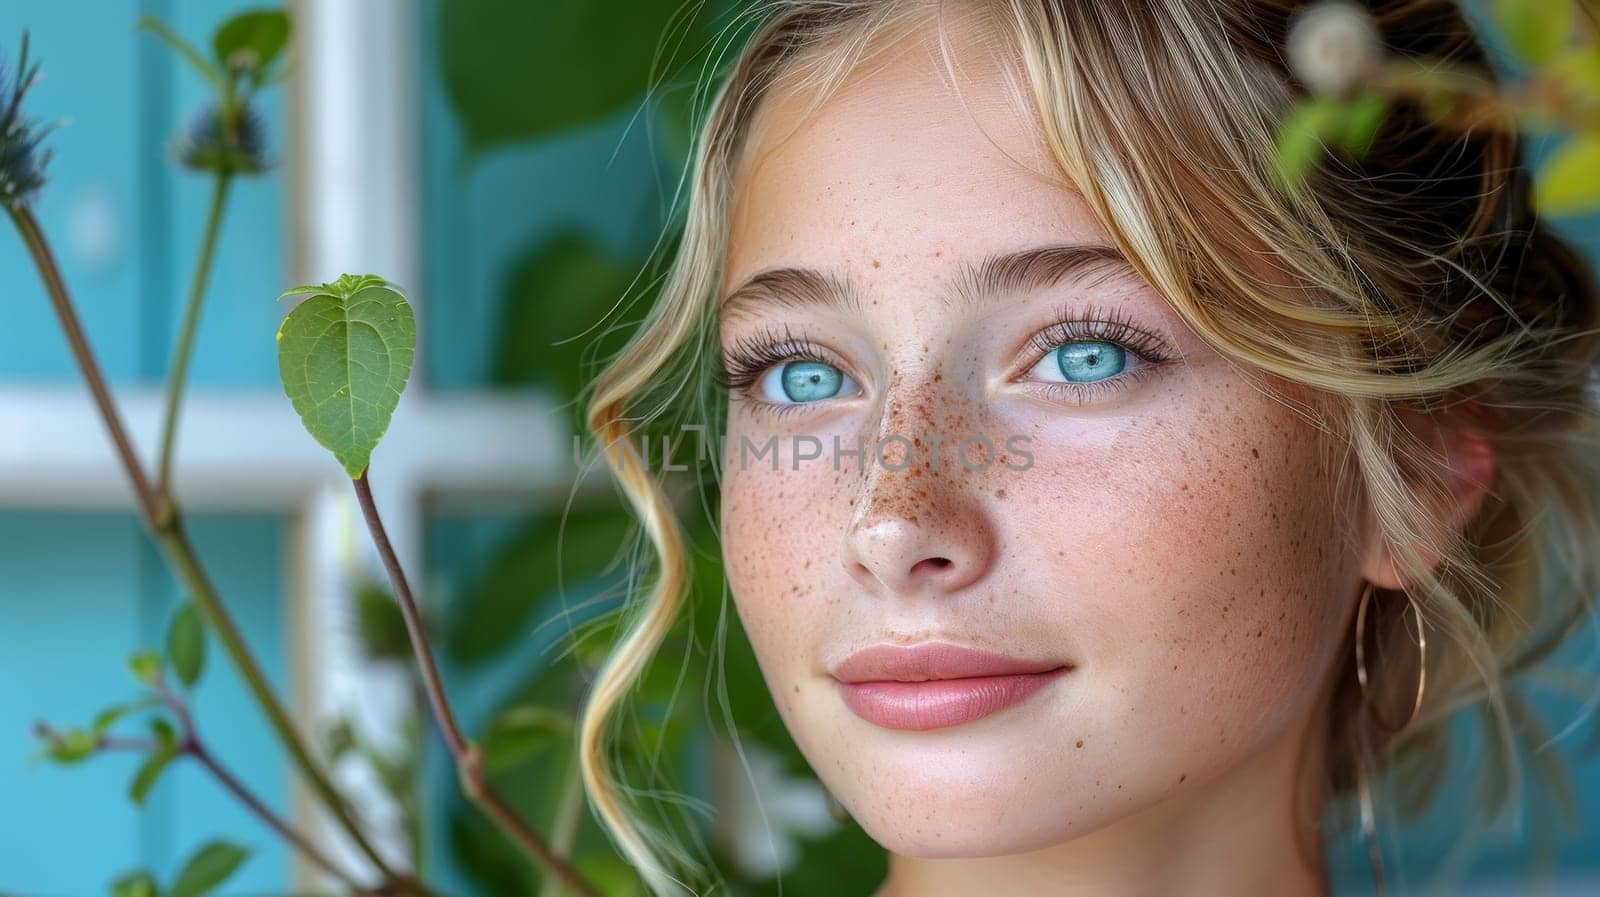 A close up of a woman with freckles and blue eyes